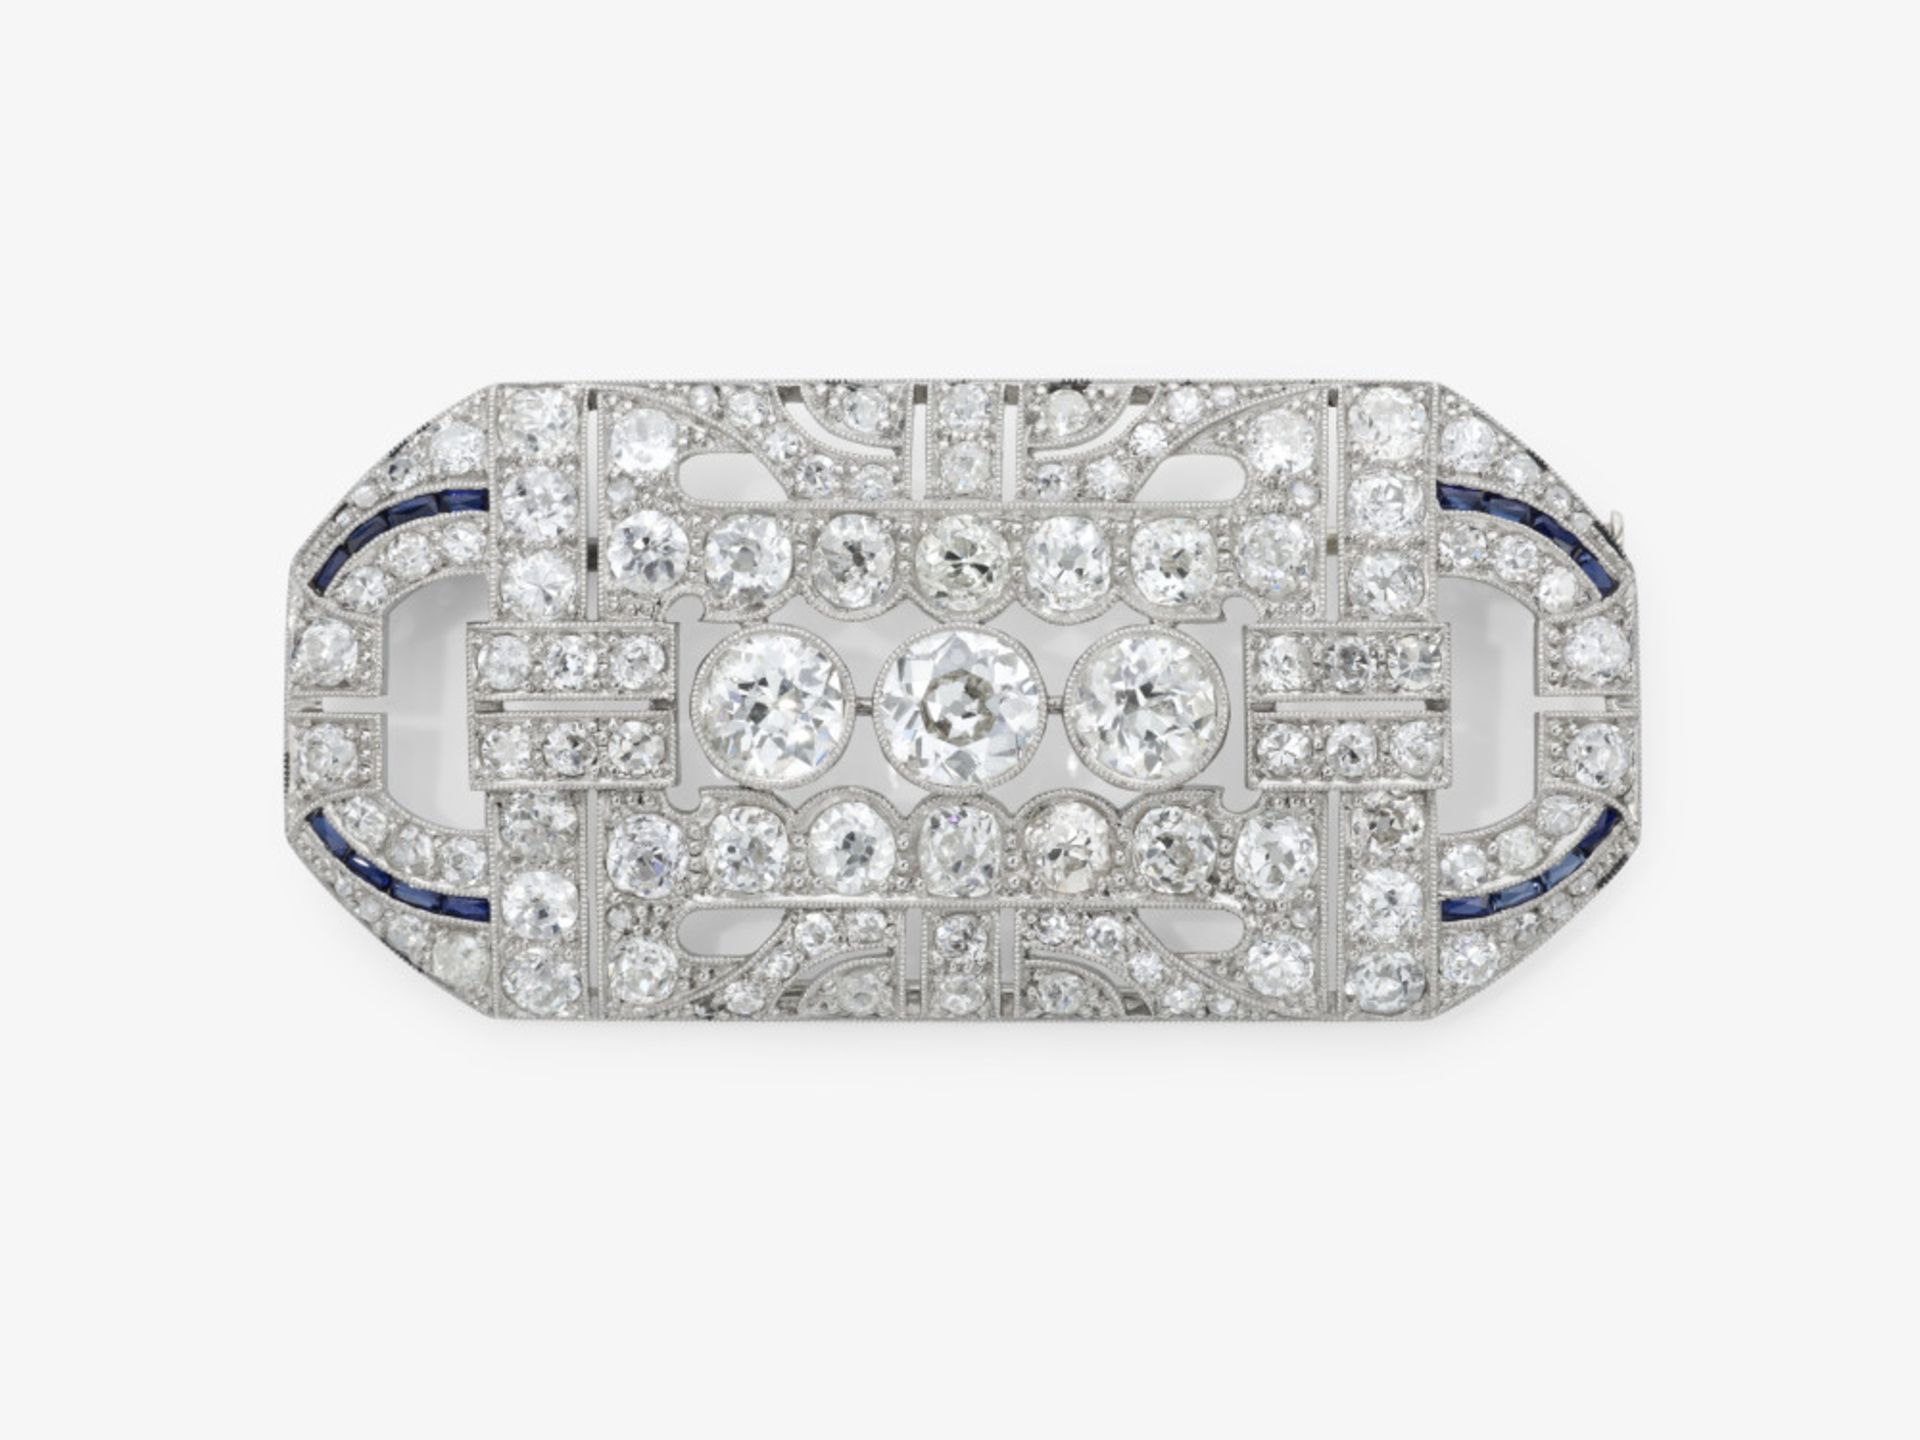 An Art Deco brooch decorated with diamonds and sapphires - America, 1920s - 1930s